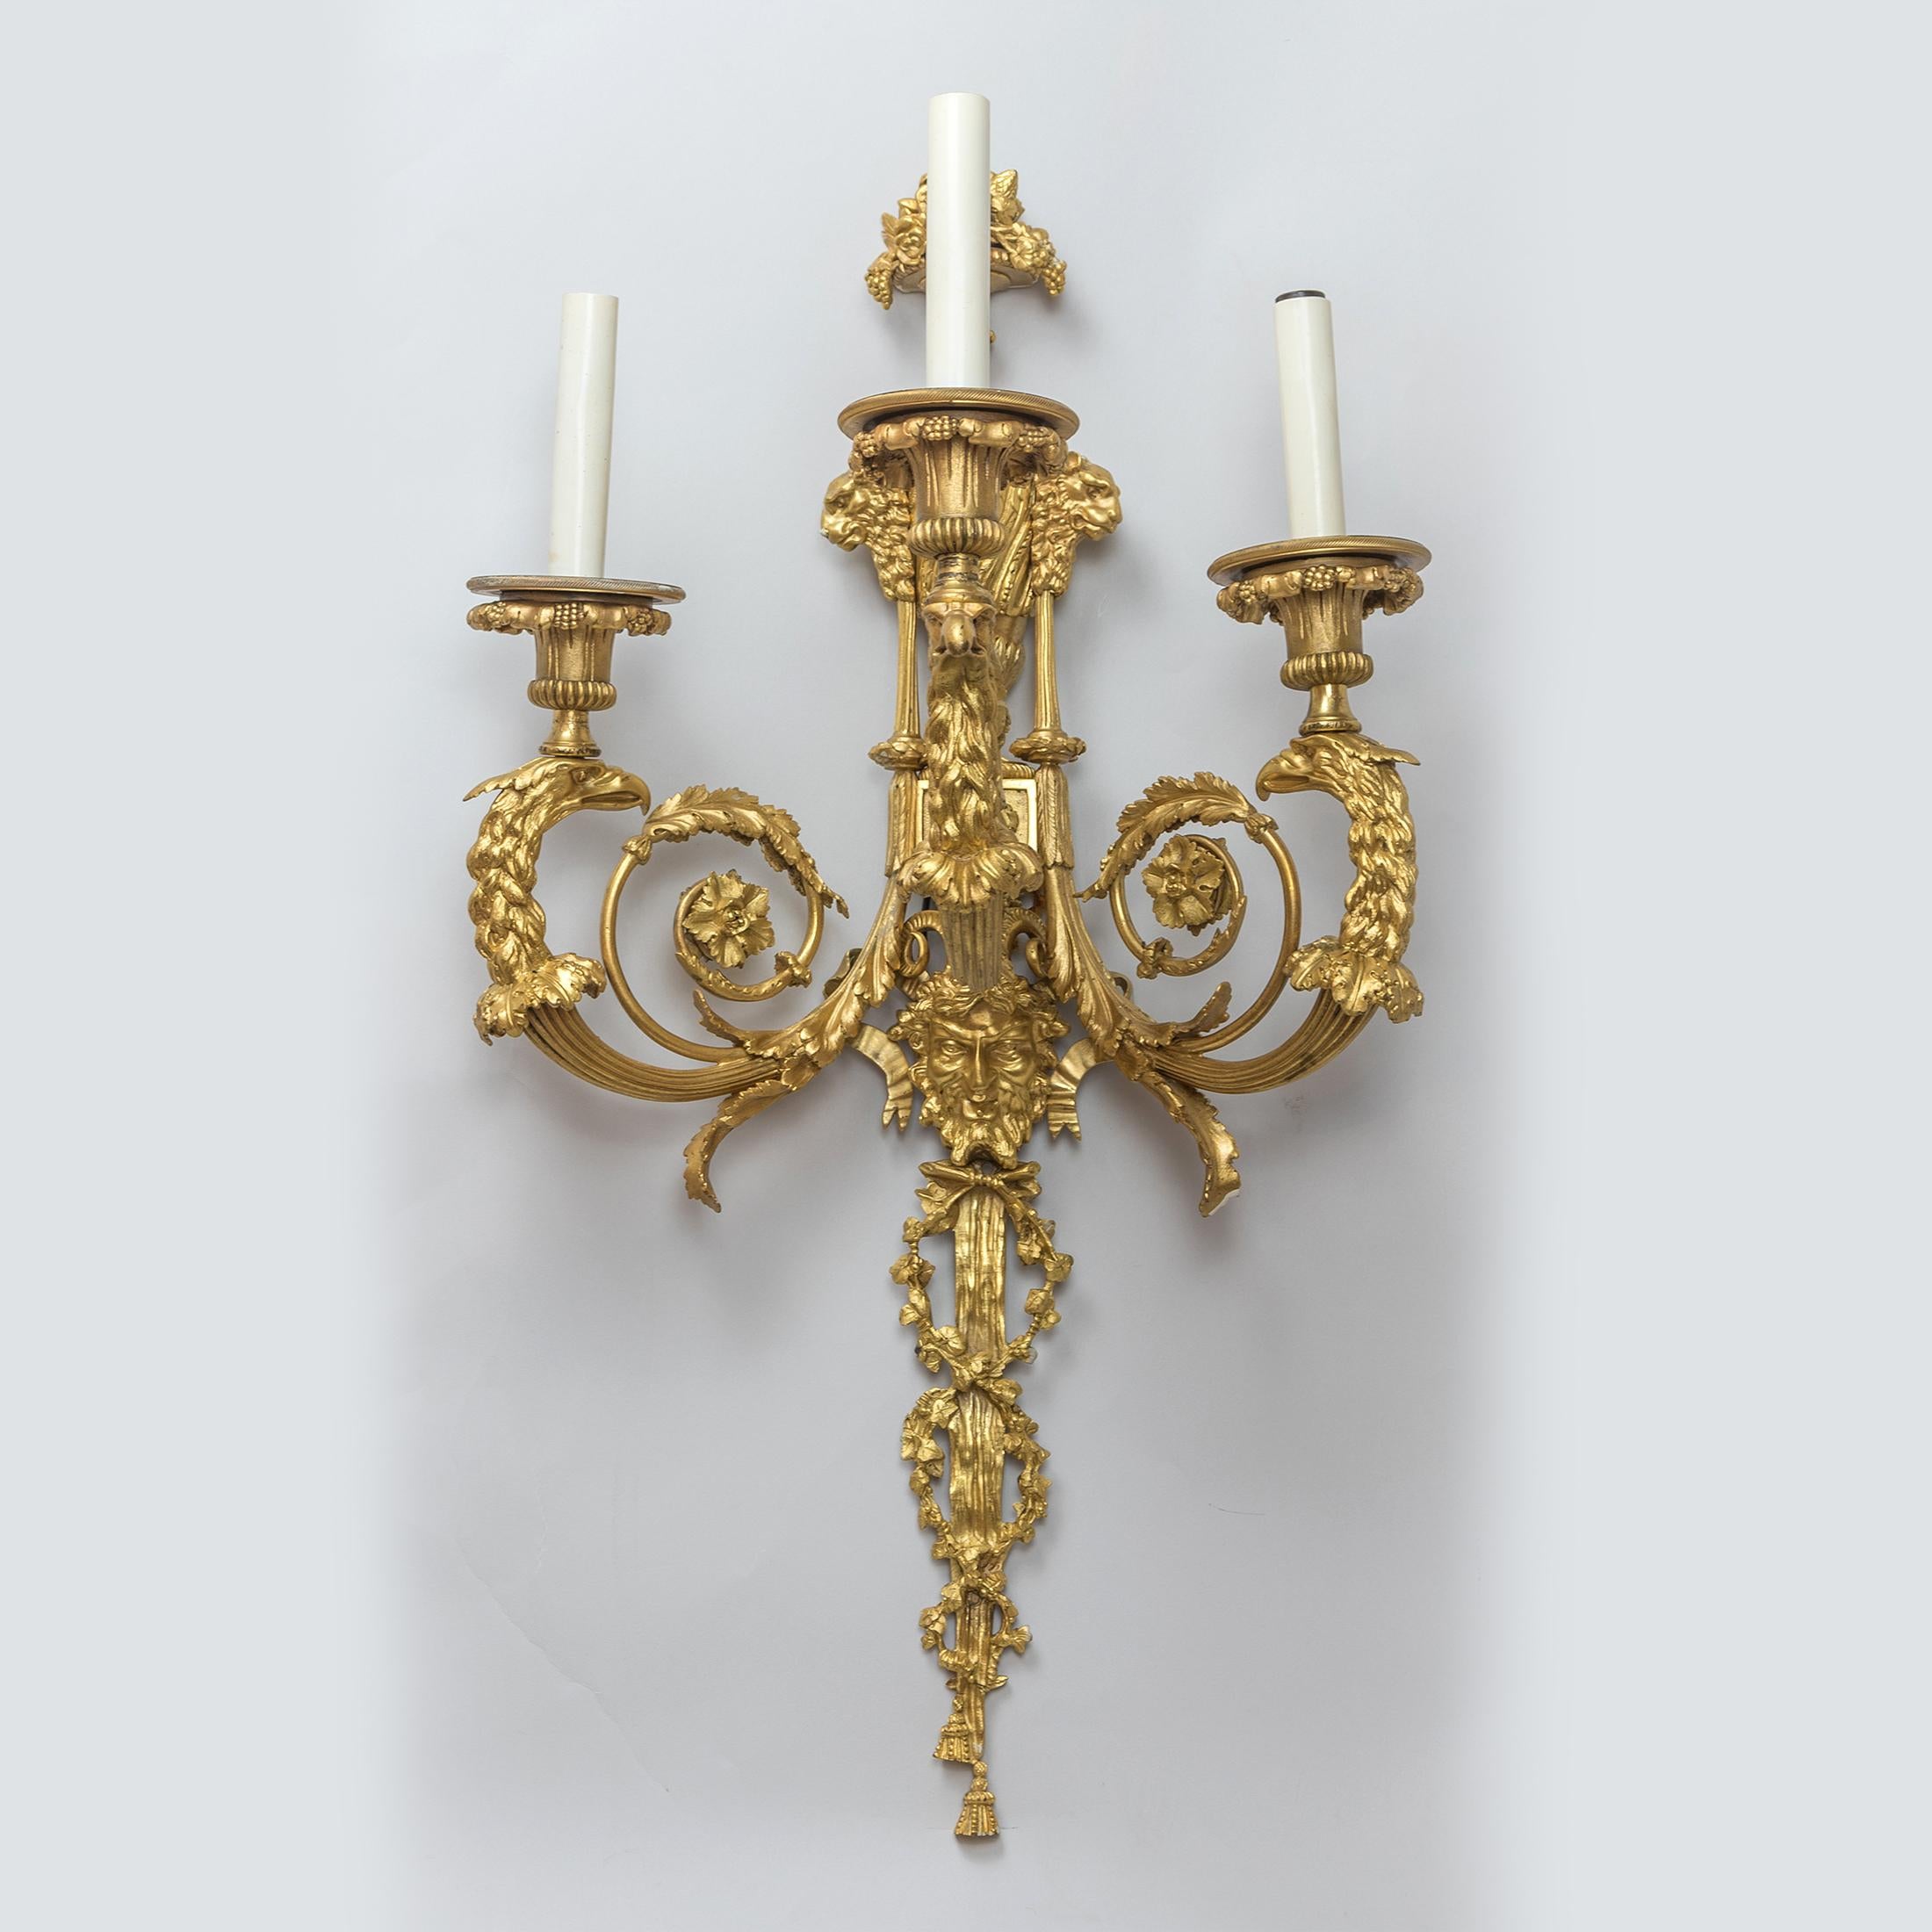 Magnificent pair of Louis XV style gilt bronze three-light wall sconces

Origin: French
Date: 19th century
Dimension: 25 1/4 in x 13 1/4 in x 10 3/4 inches.